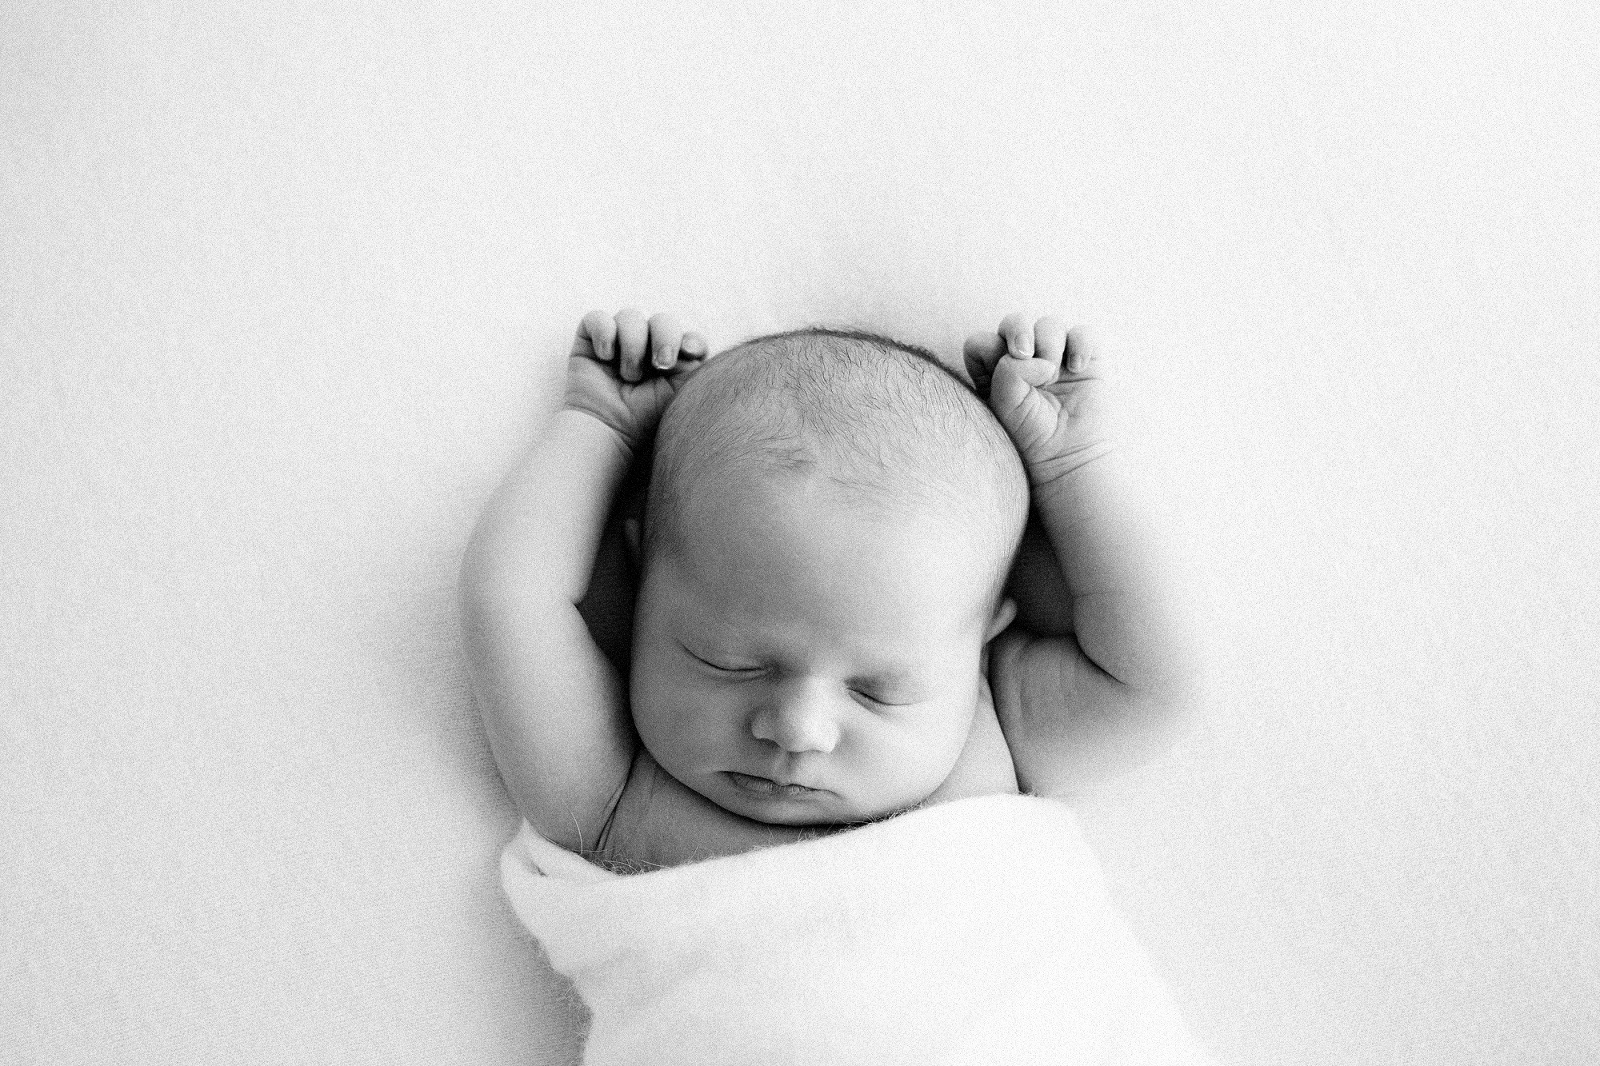 black and white image of a newborn baby